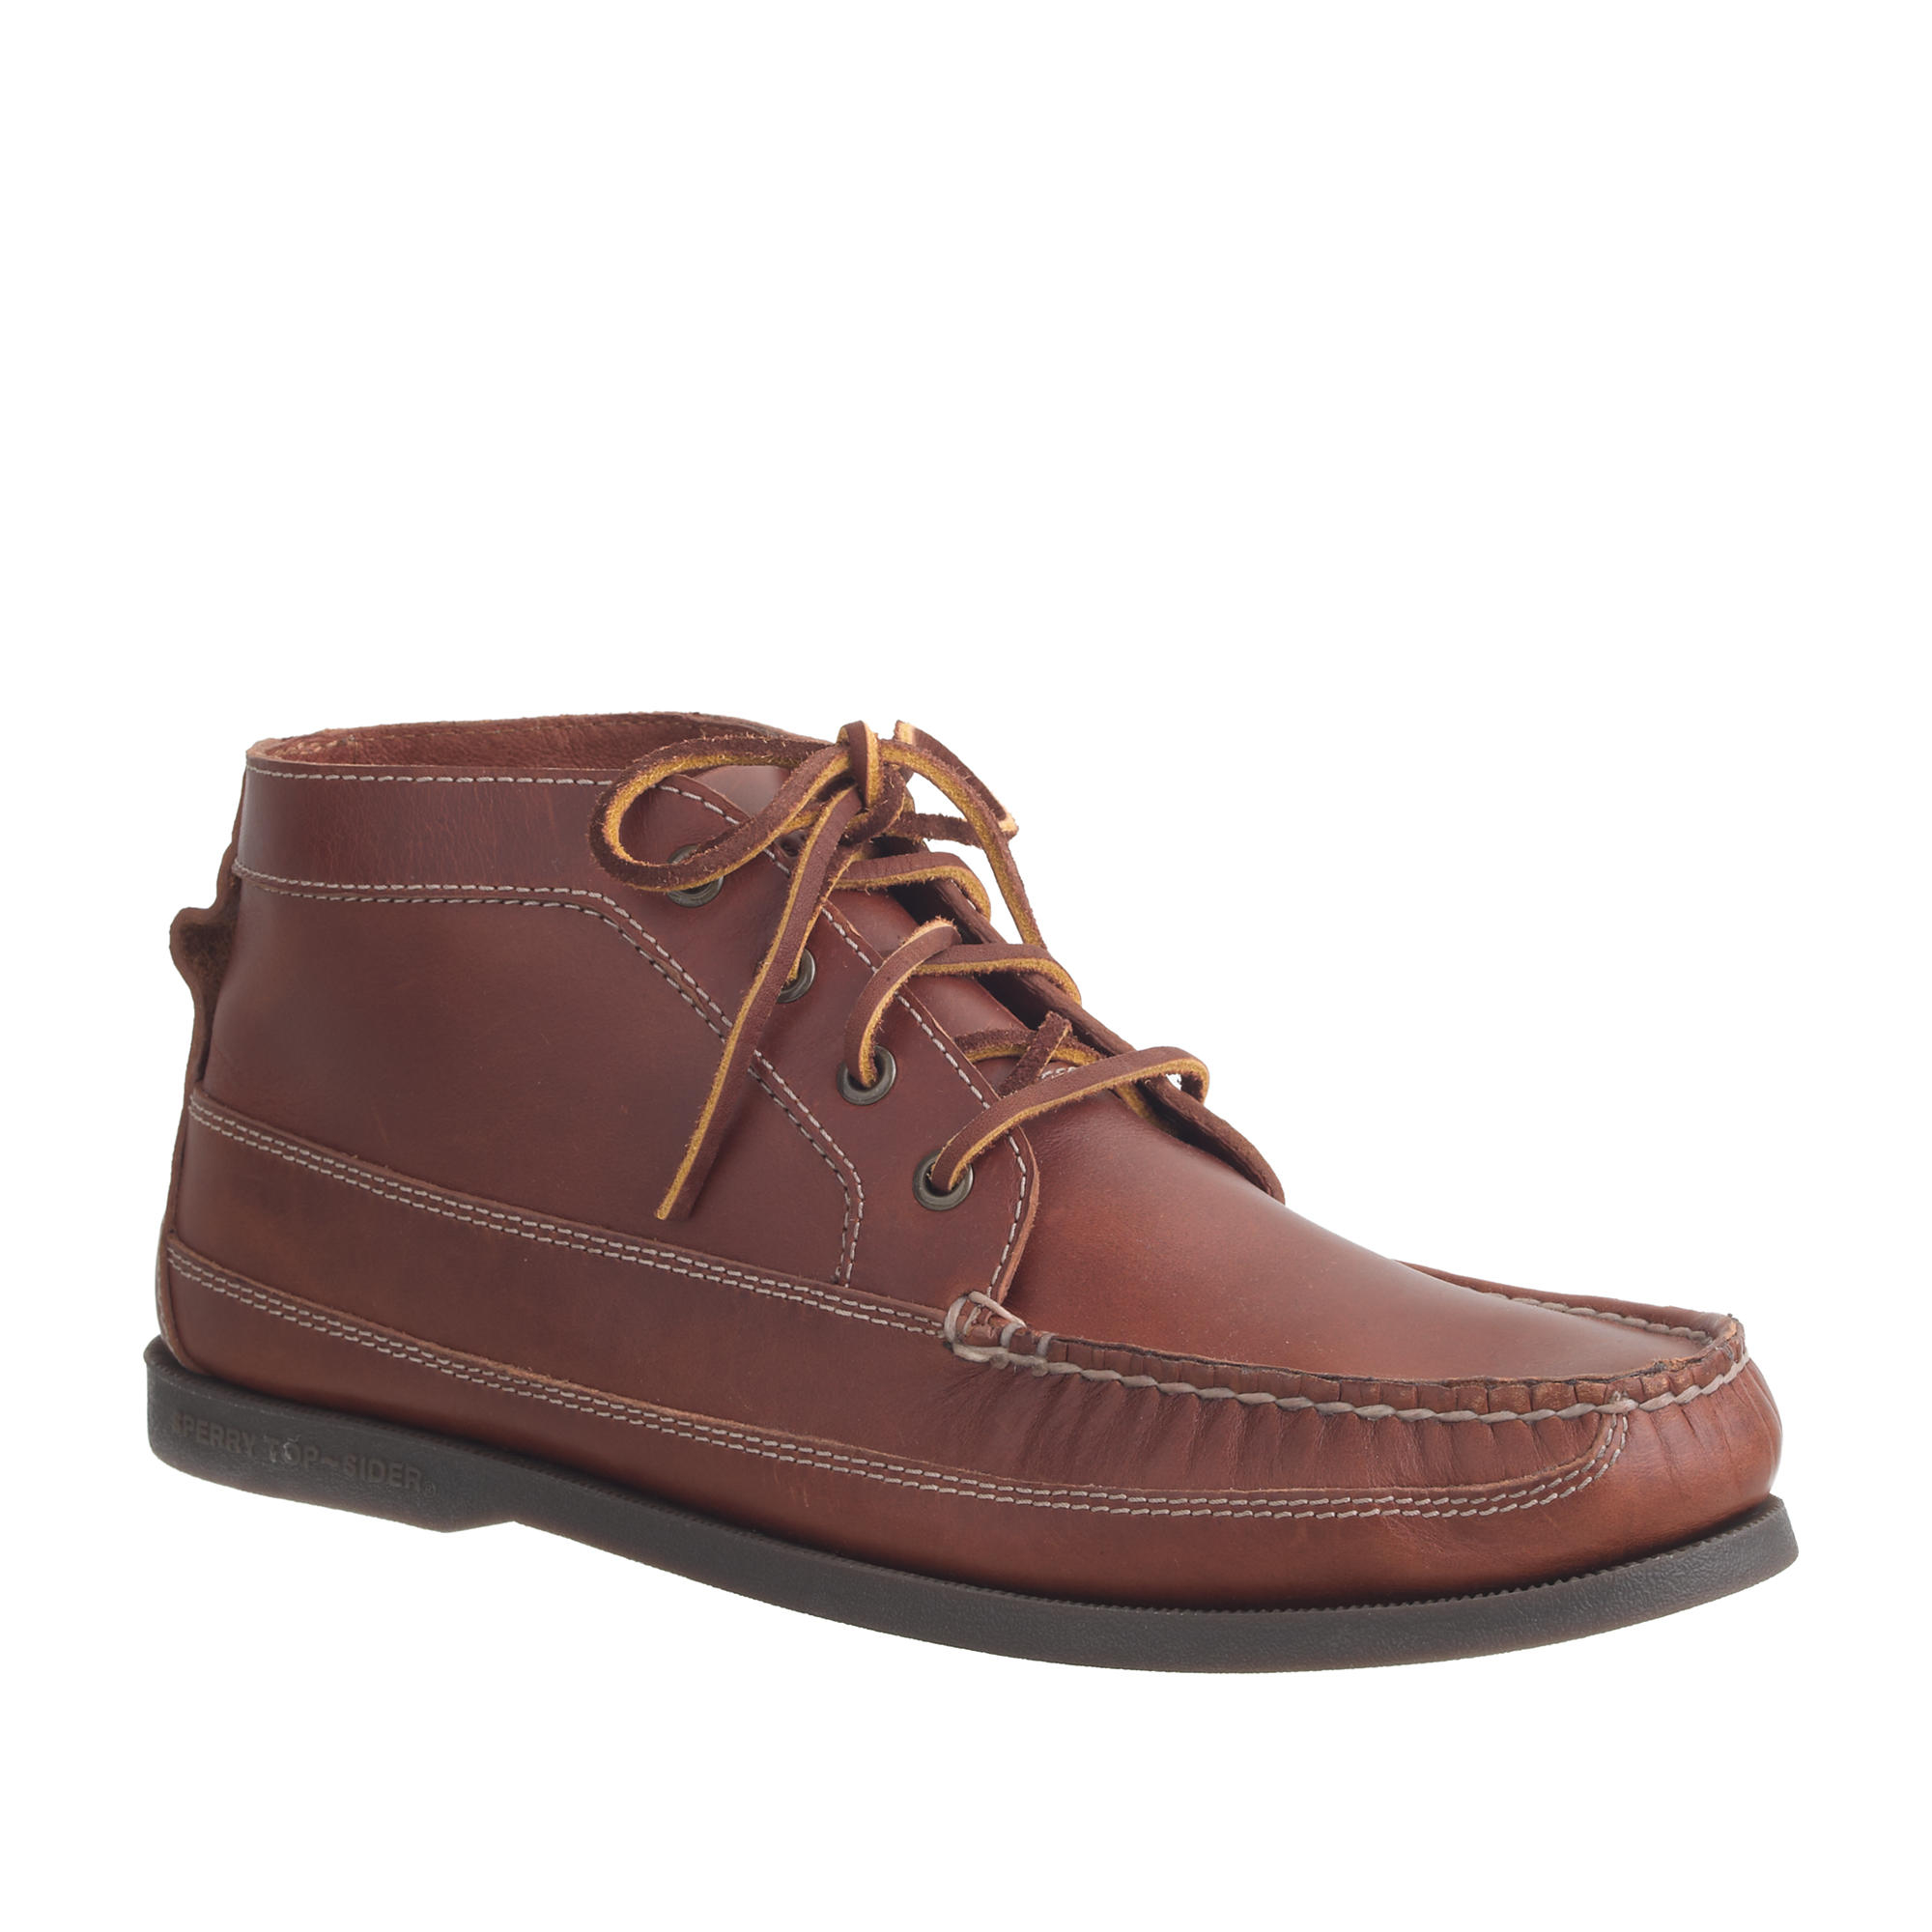 Sperry Top-Sider Men's Sperry Leather Chukka Boots in Brown for Men - Lyst